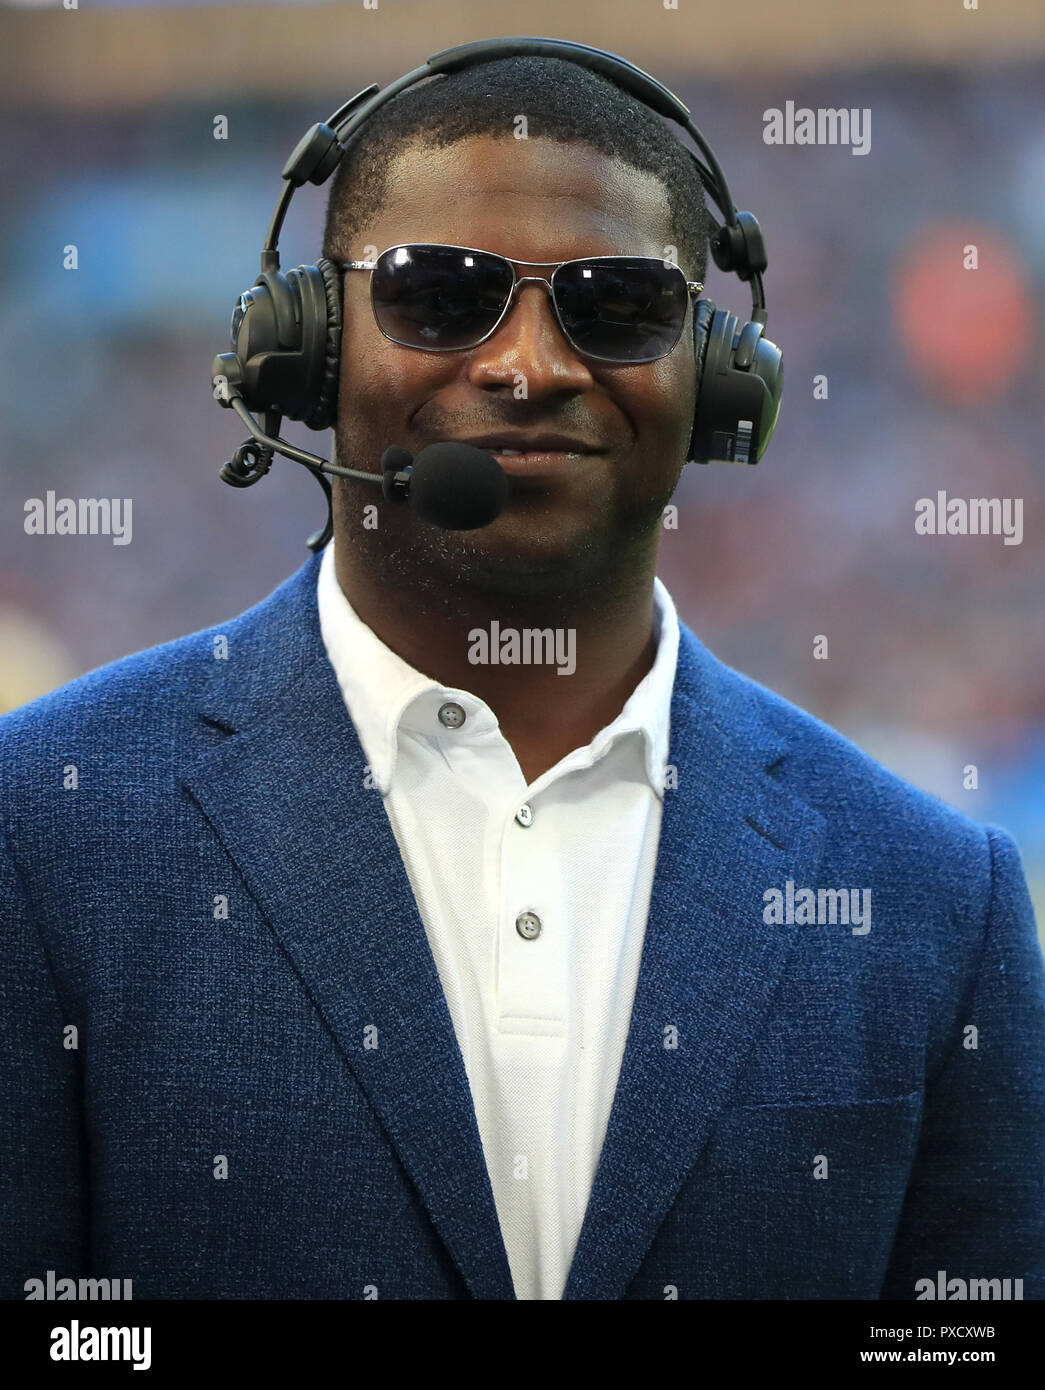 Hall of Fame LA Charger LaDainian Tomlinson during the International Series NFL match at Wembley Stadium, London. PRESS ASSOCIATION Photo. Picture date: Sunday October 21, 2018. See PA story GRIDIRON London. Photo credit should read: Simon Cooper/PA Wire. RESTRICTIONS: News and Editorial use only. Commercial/Non-Editorial use requires prior written permission from the NFL. Digital use subject to reasonable number restriction and no video simulation of game. Stock Photo